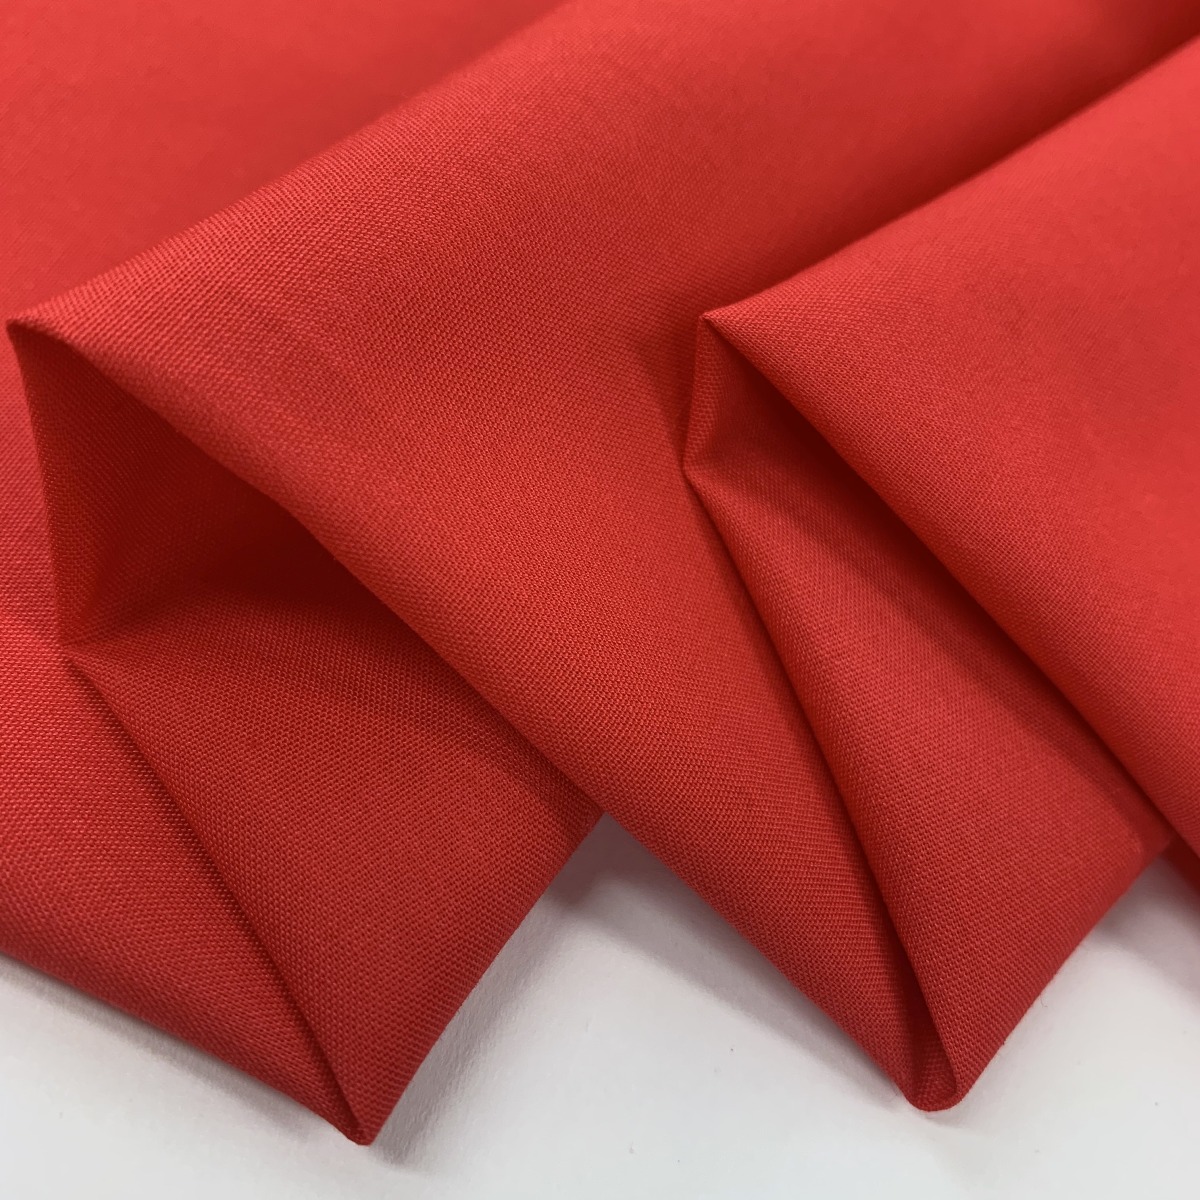 Superior Quality Plain Poly/Cotton - Red